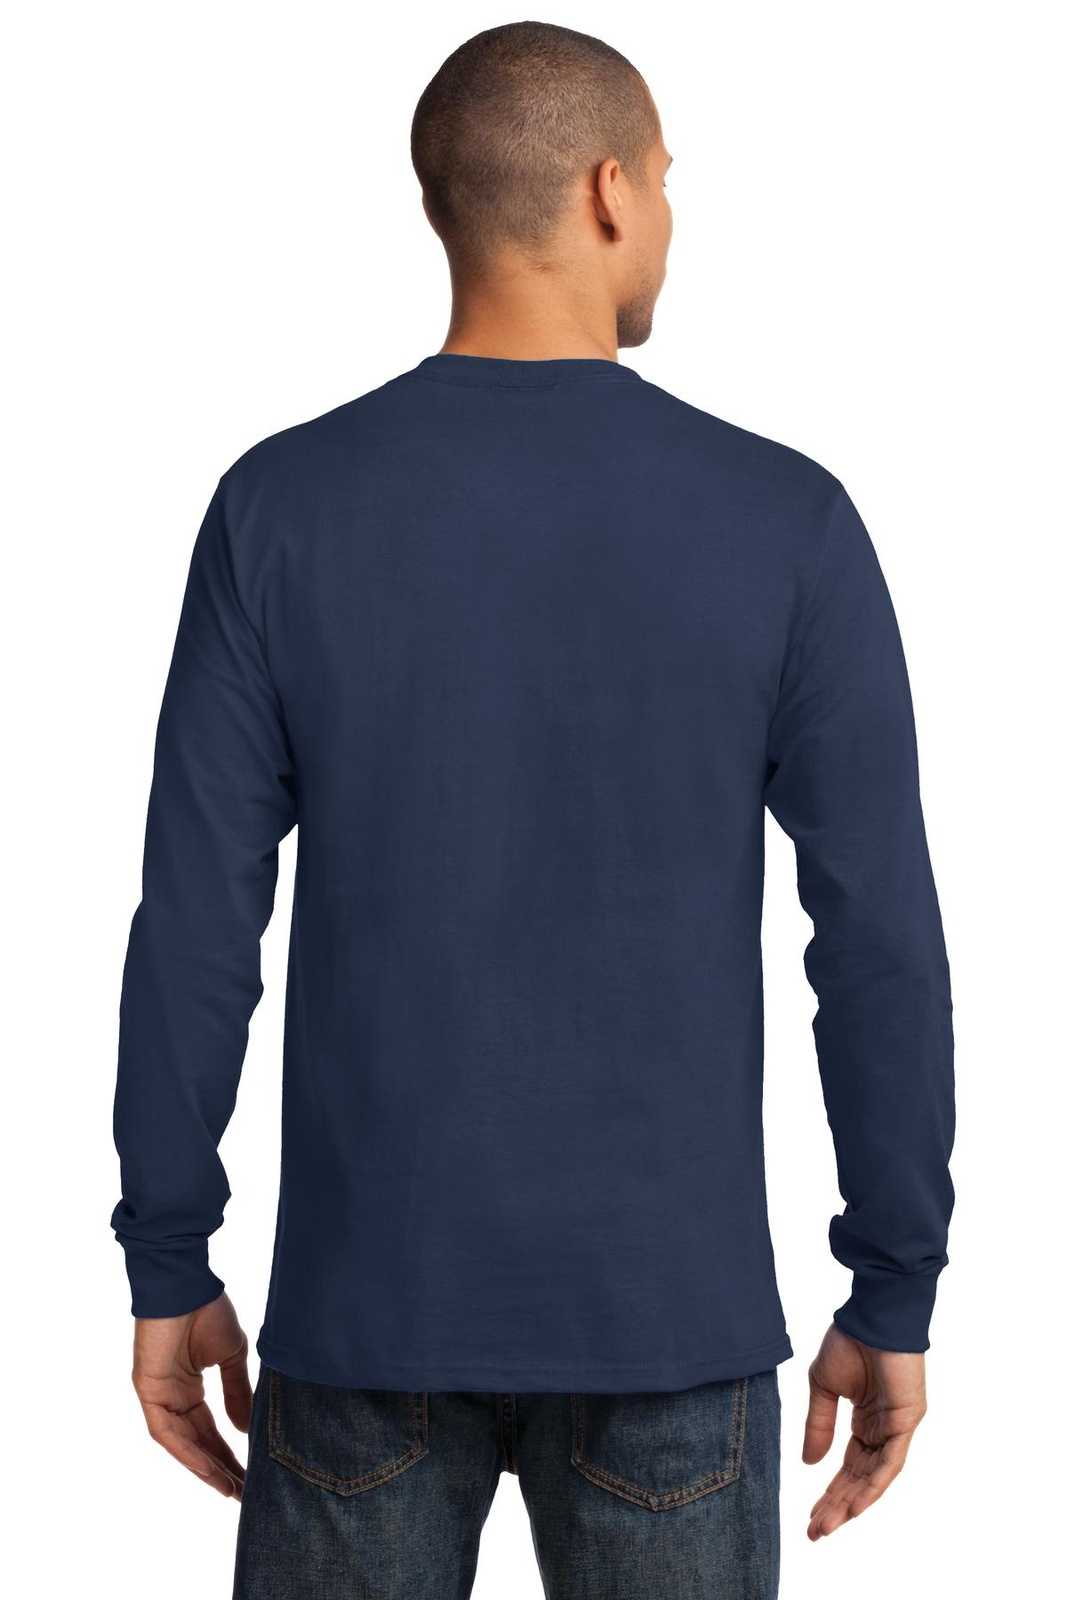 Port & Company PC61LS Long Sleeve Essential Tee - Navy - HIT a Double - 1